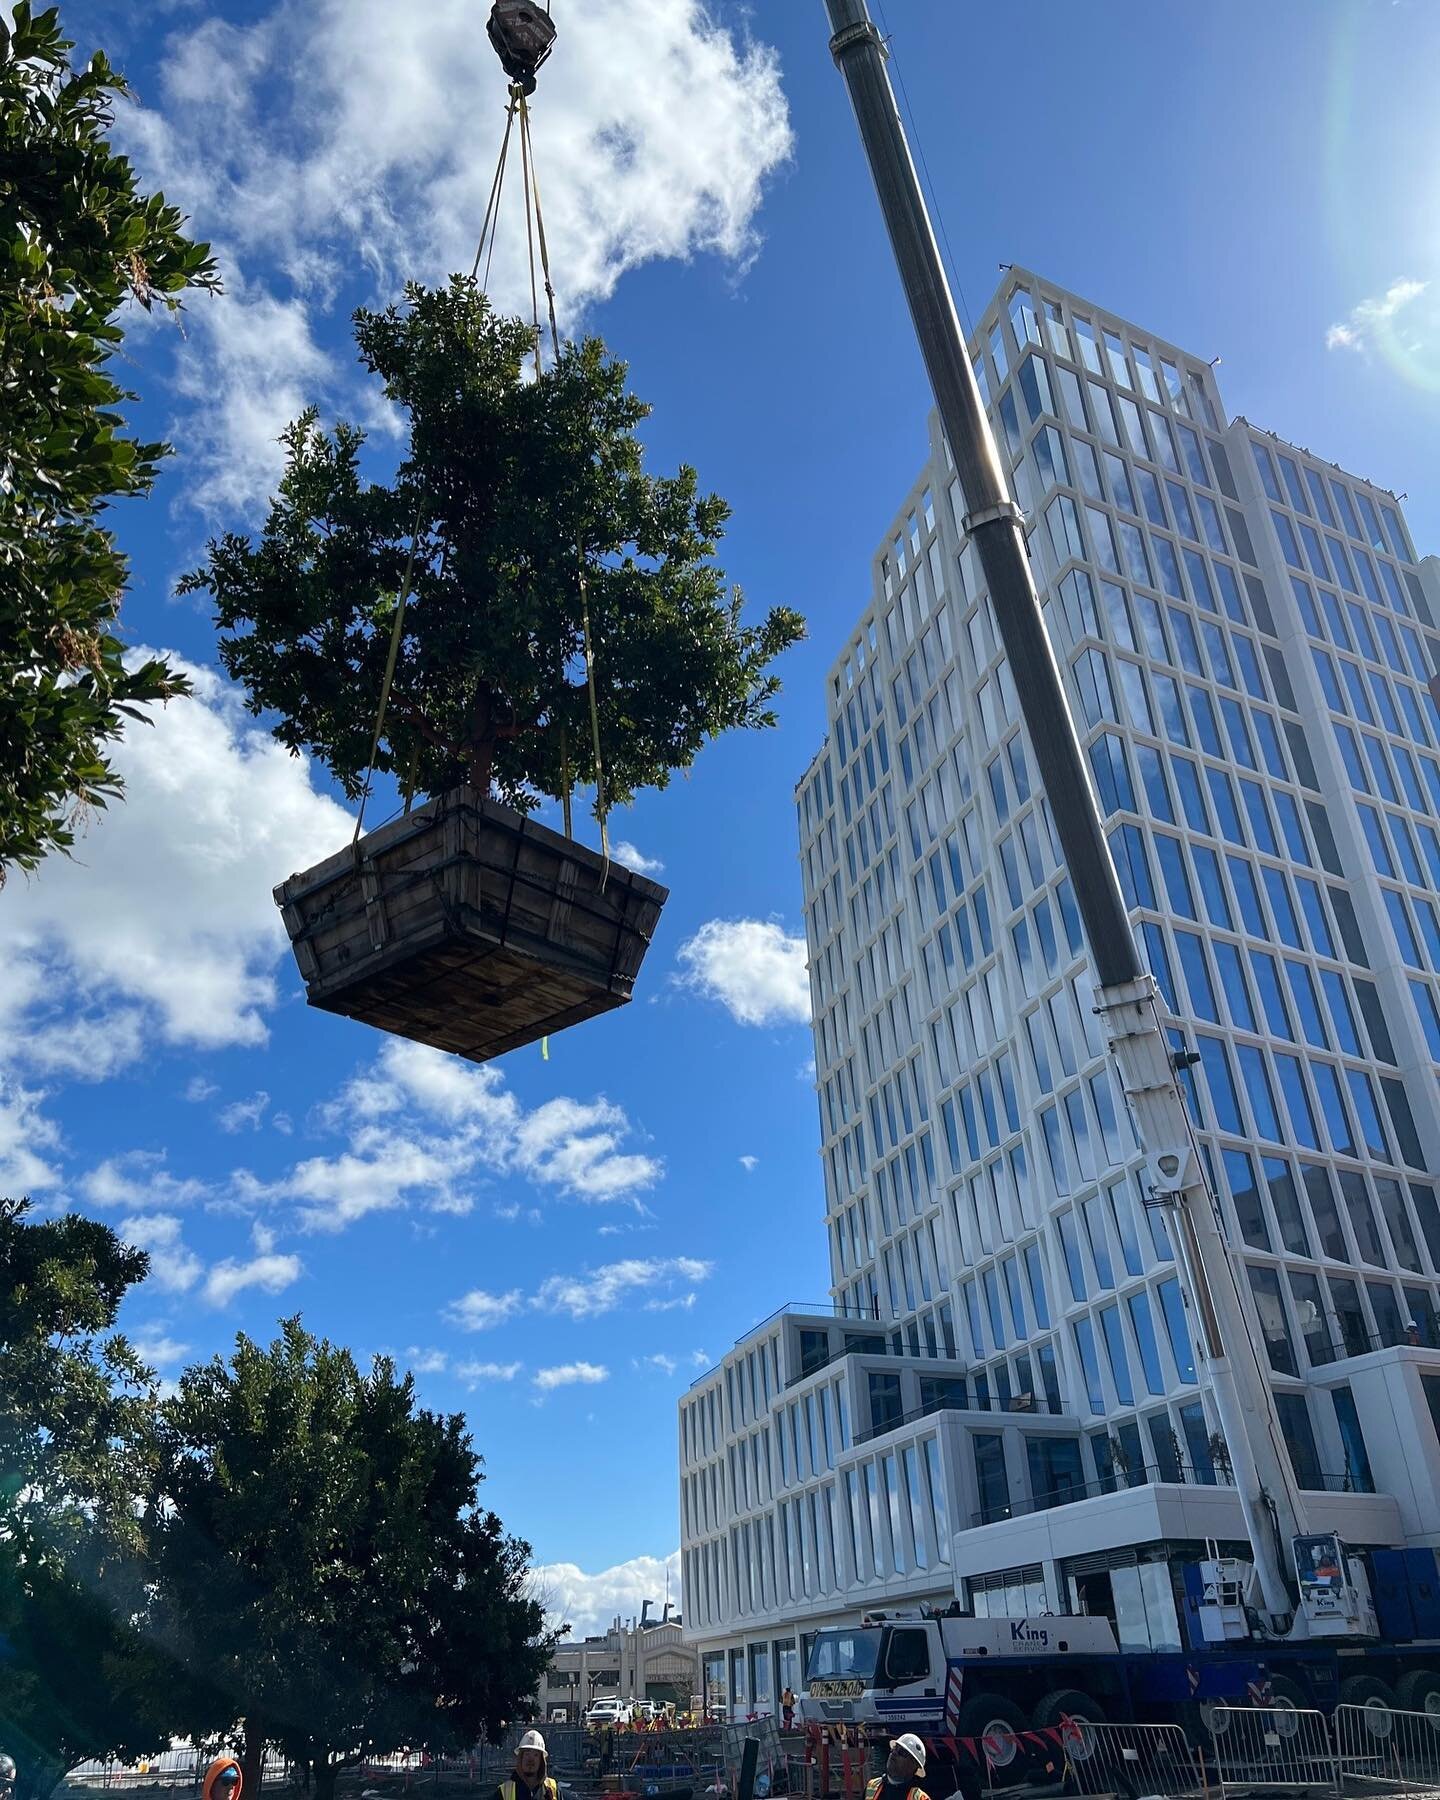 Large trees for the new China Basin Park have arrived and are being craned into position. Miller Company is working closely with SCAPE Studio, Webcor, SBCA arborists, and Jensen Landscape for all new plantings in the park. Stayed tuned as the park de